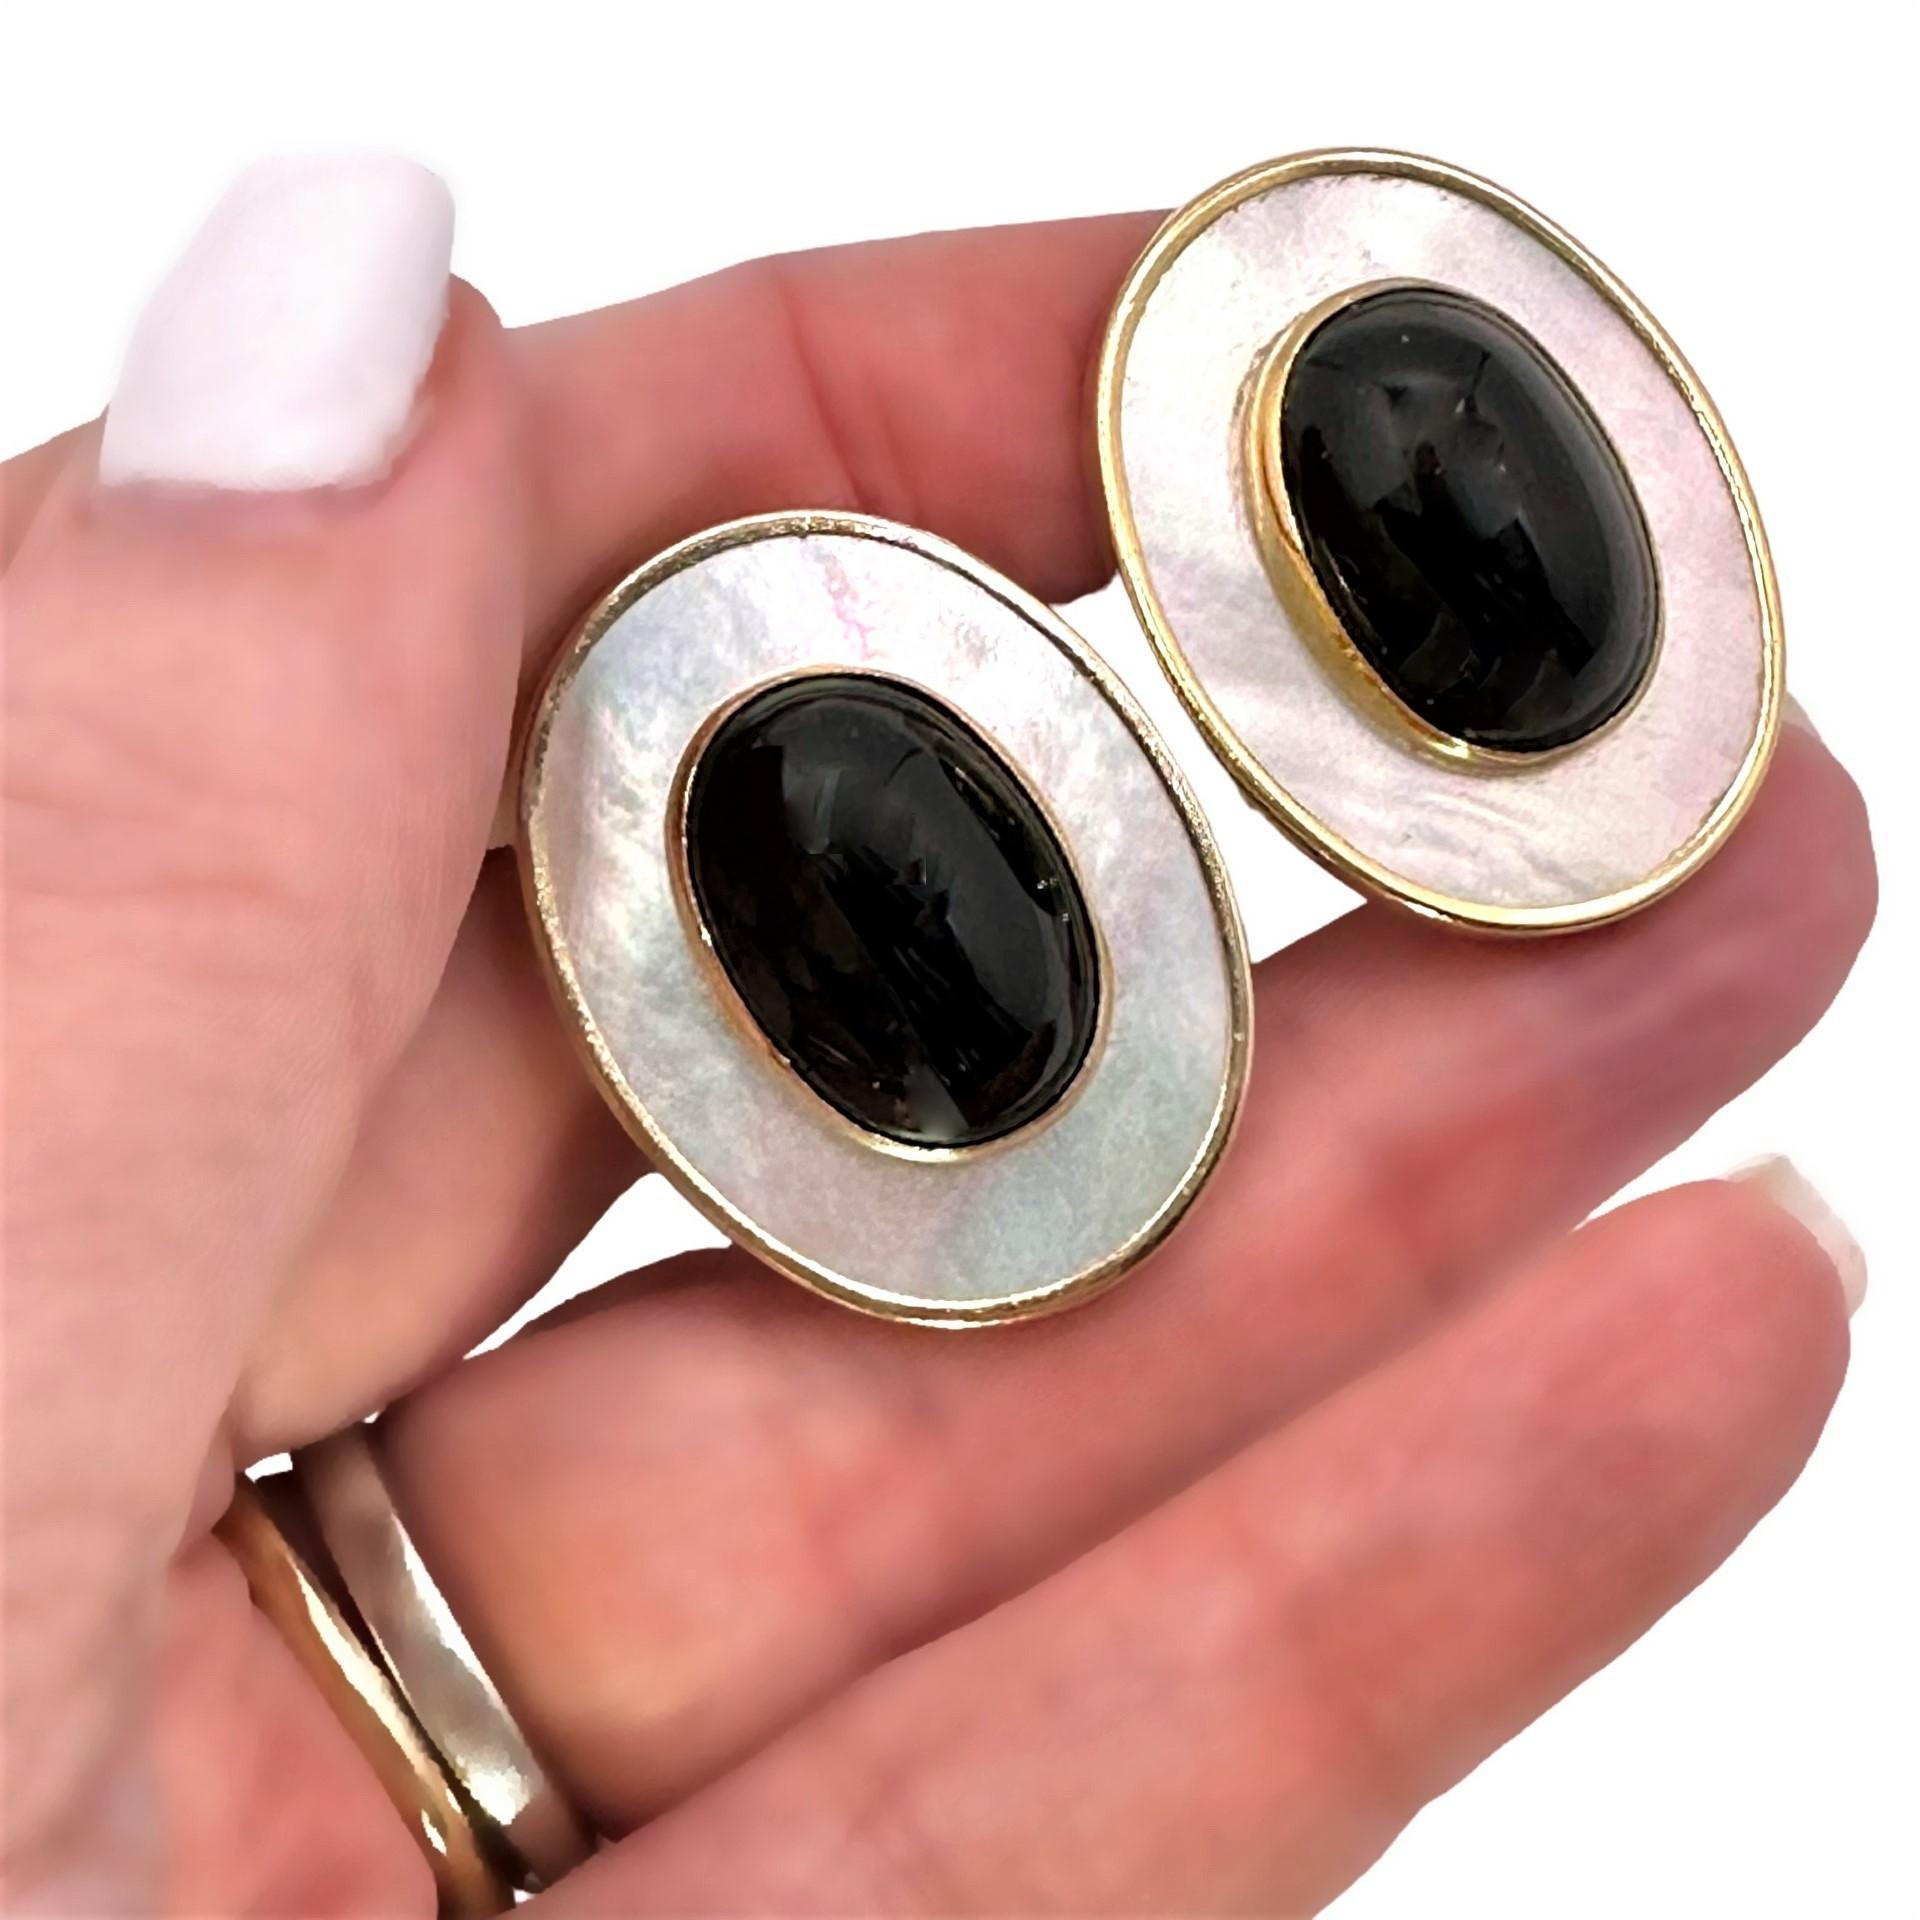 Gold, Mother of Pearl, and Onyx, Oval Shaped Earrings by Peter Brams Designs In Good Condition For Sale In Palm Beach, FL